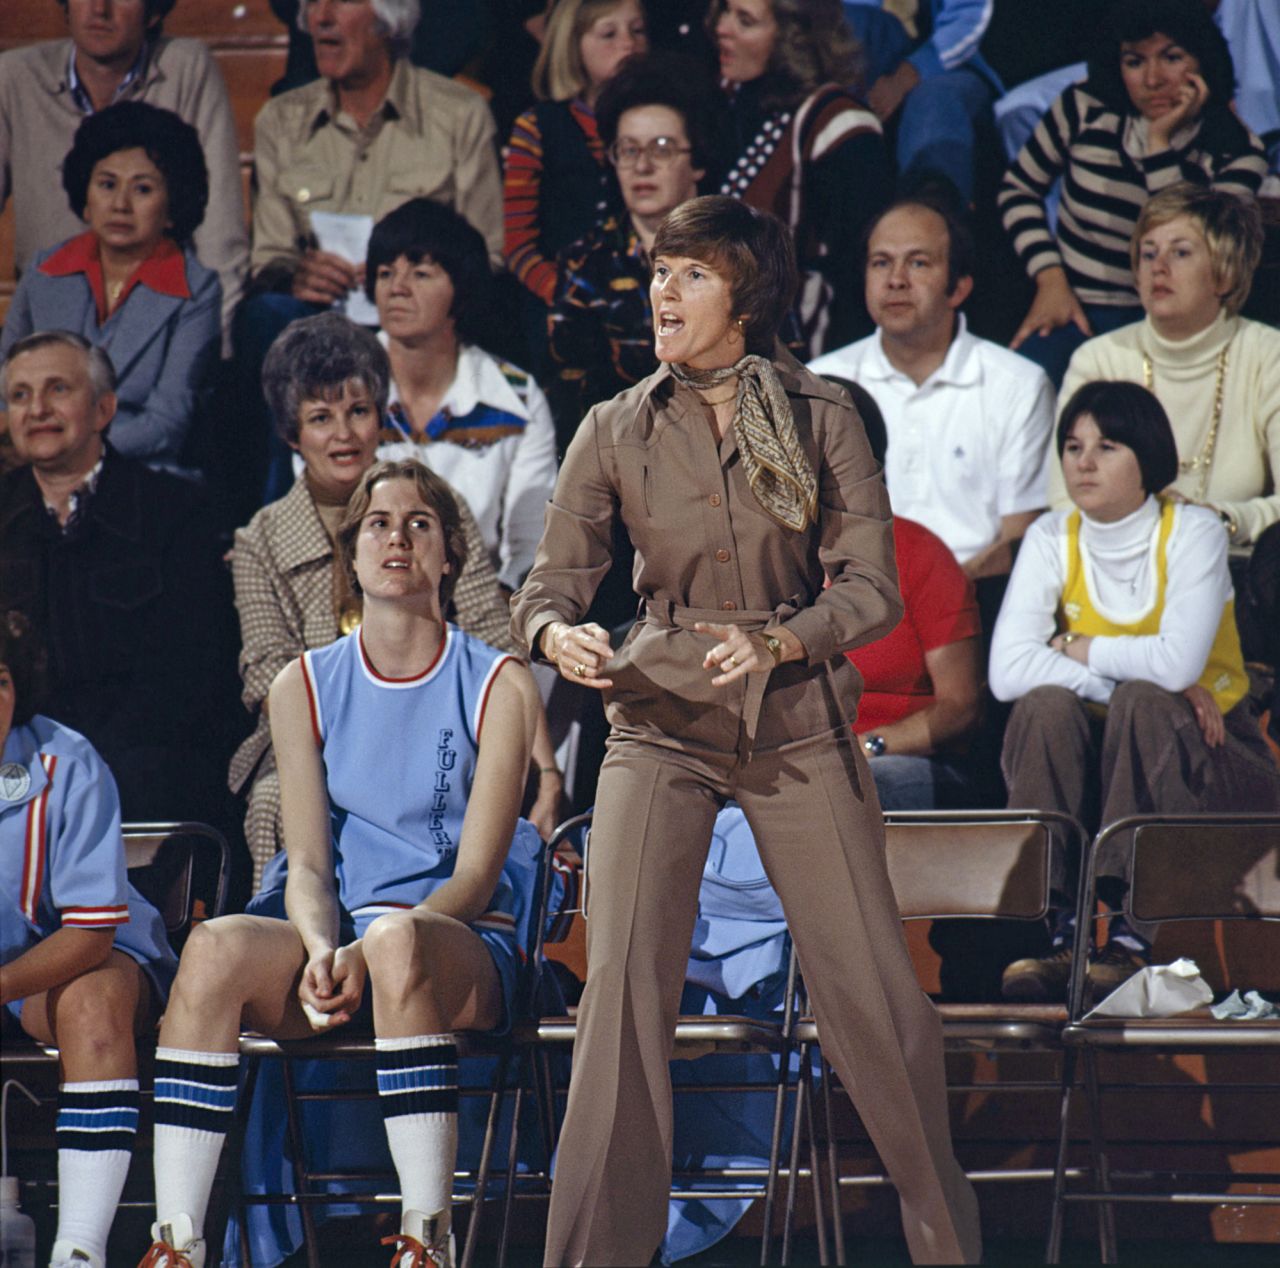 Billie Moore, a Hall of Fame basketball coach who was head coach of the first US women's Olympic basketball team, died Wednesday, December 14, at the age of 79. Moore was also the first head coach to lead two schools to national championships in women's basketball.